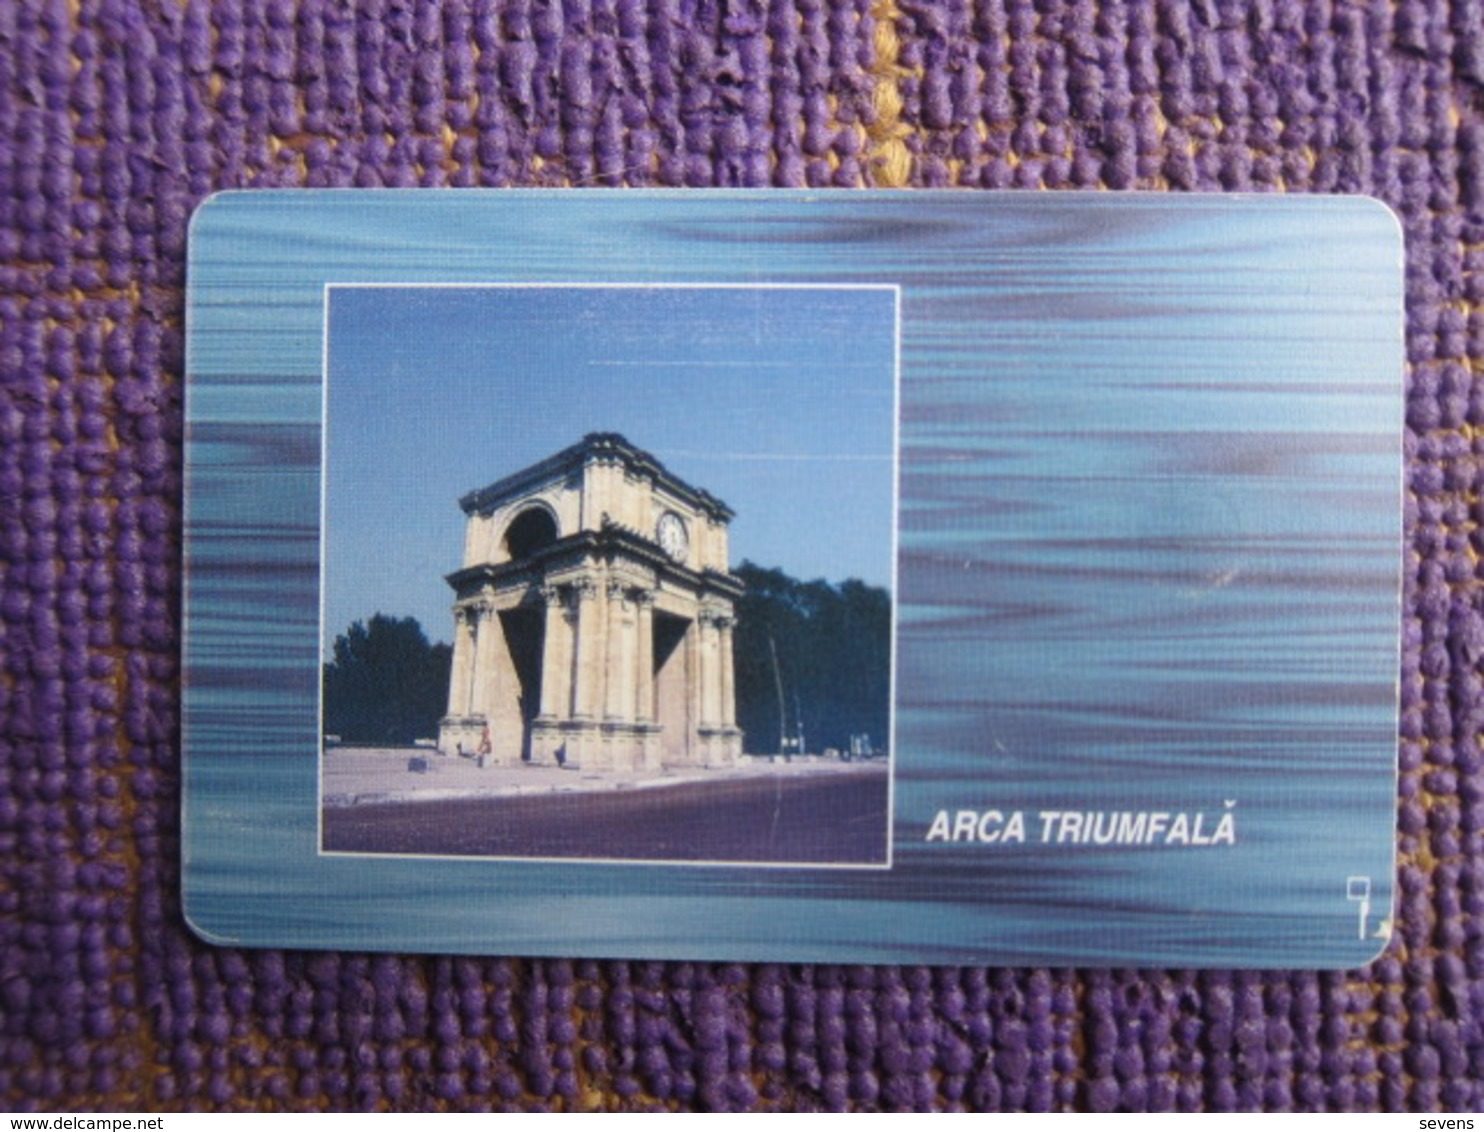 The First Issued Chip Phonecard,Flag And Arca Triumfala,used With Tiny Scratch - Moldavie